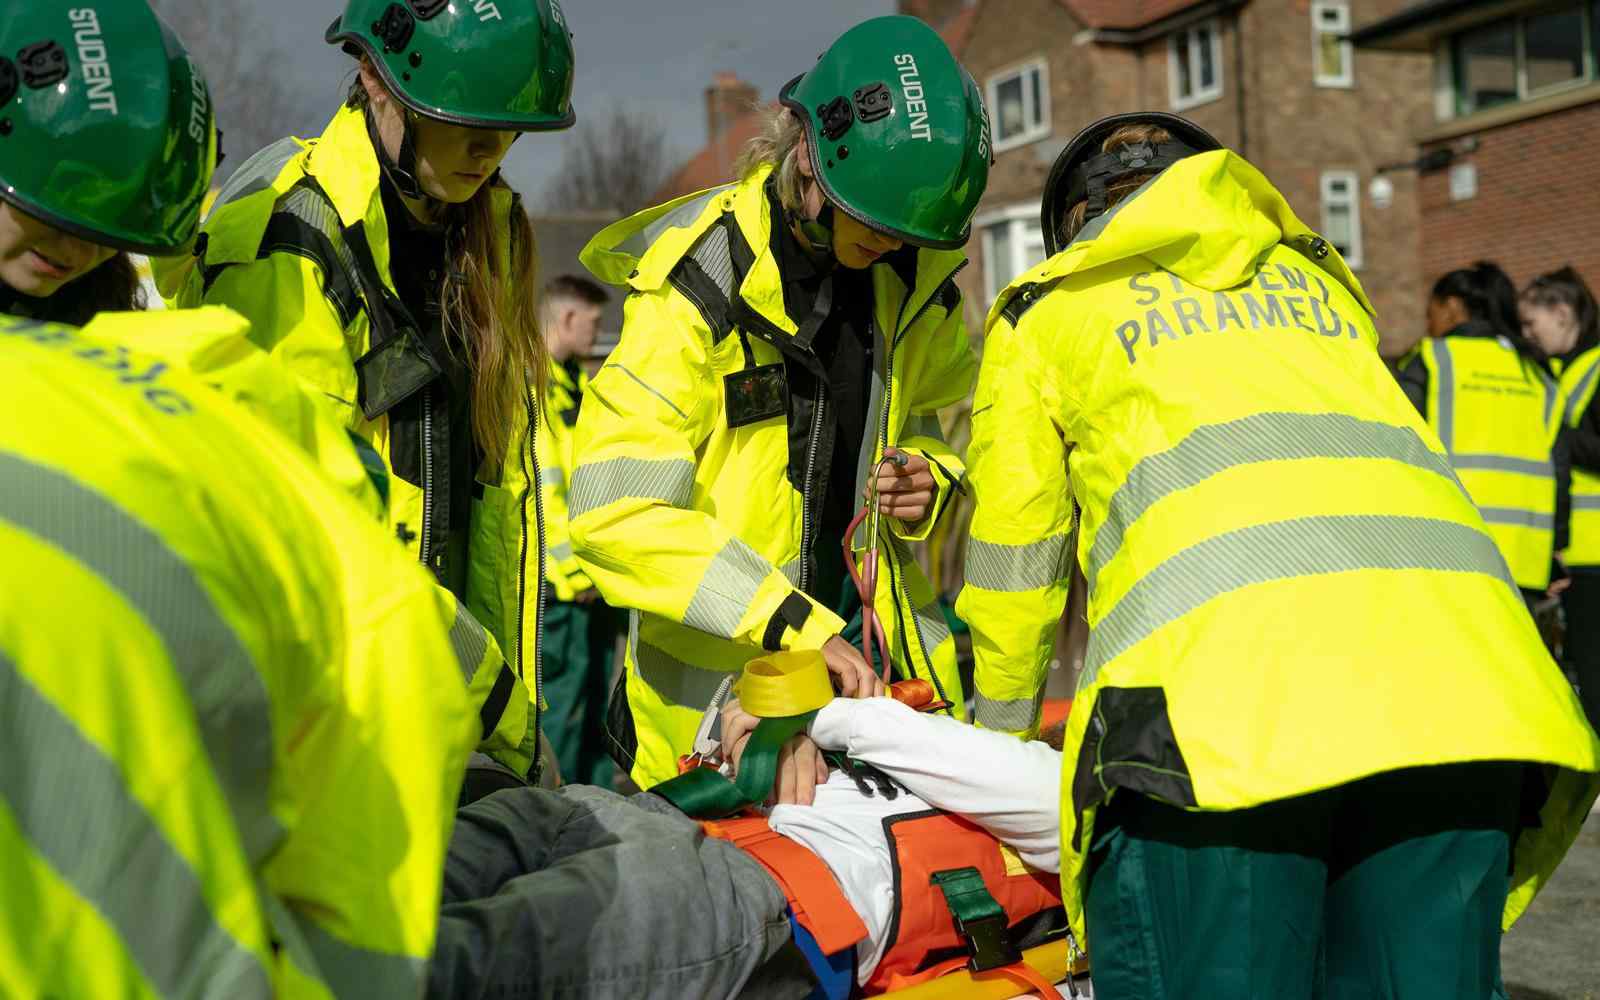 Students gather around a patient on a trolley during a Paramedic Simulation Day 